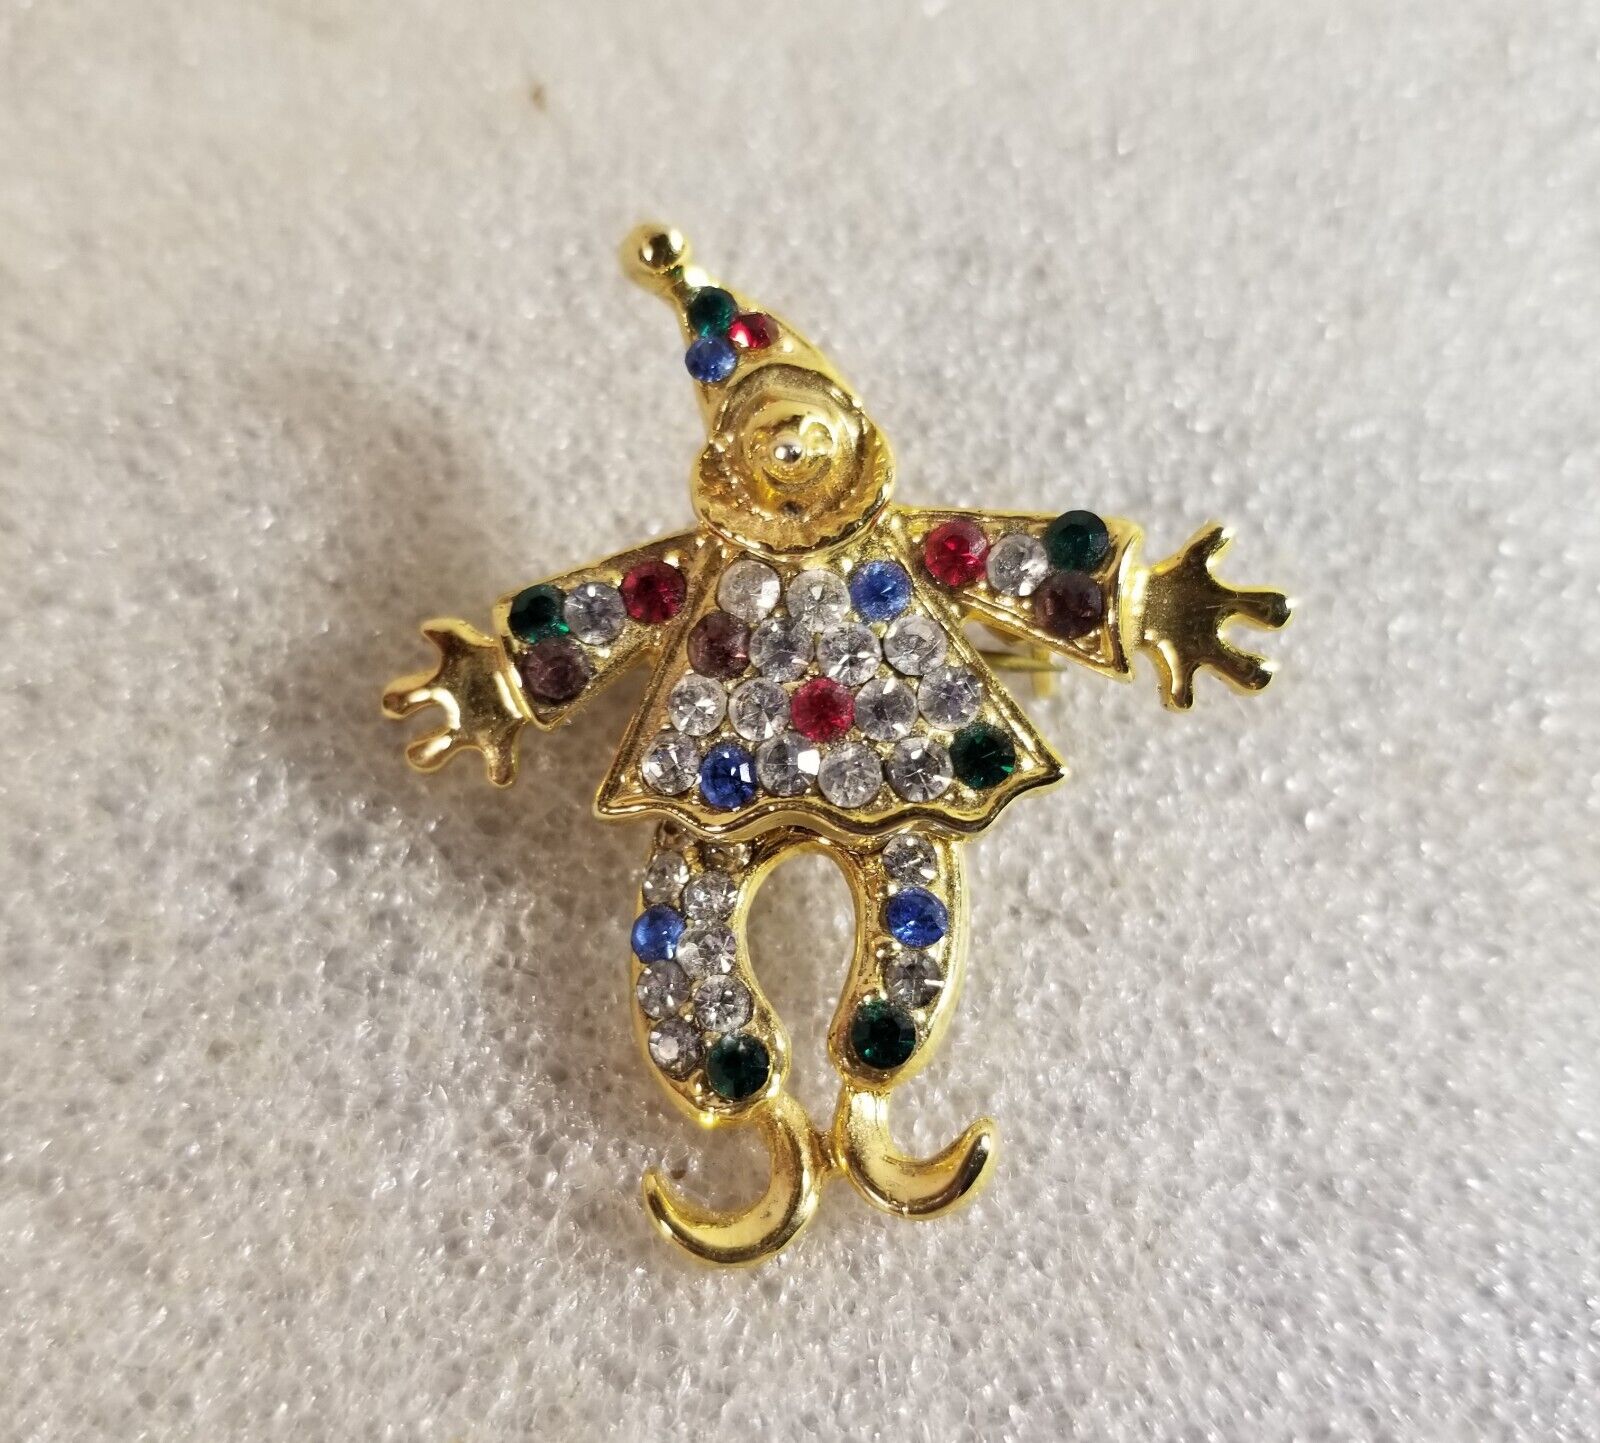 Swarovski Crystal Articulated Legs Clown Scatter Pin Brooch Colorful 